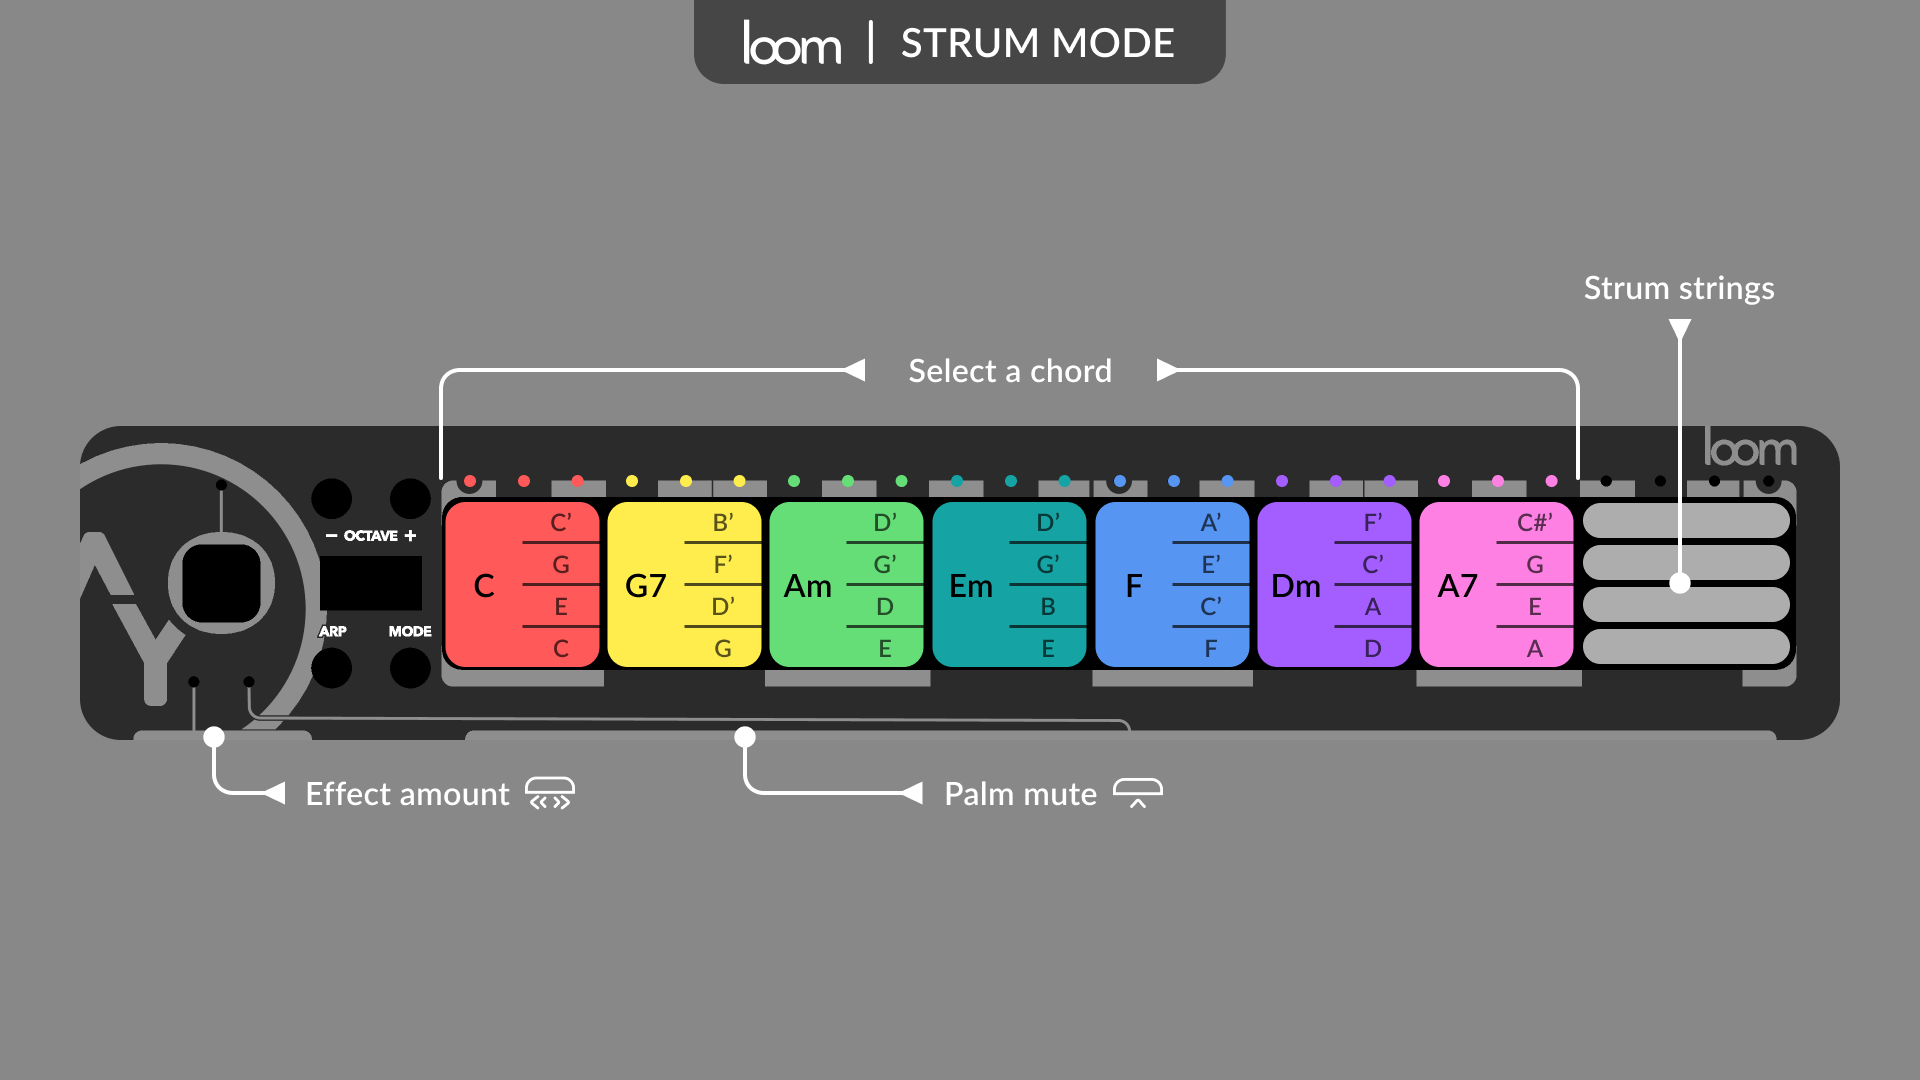 Strum mode with the default mapping: on the surface, select one of the chords with one hand, strum the strings with the other, palm mute on the bar, effect amount on the slider.